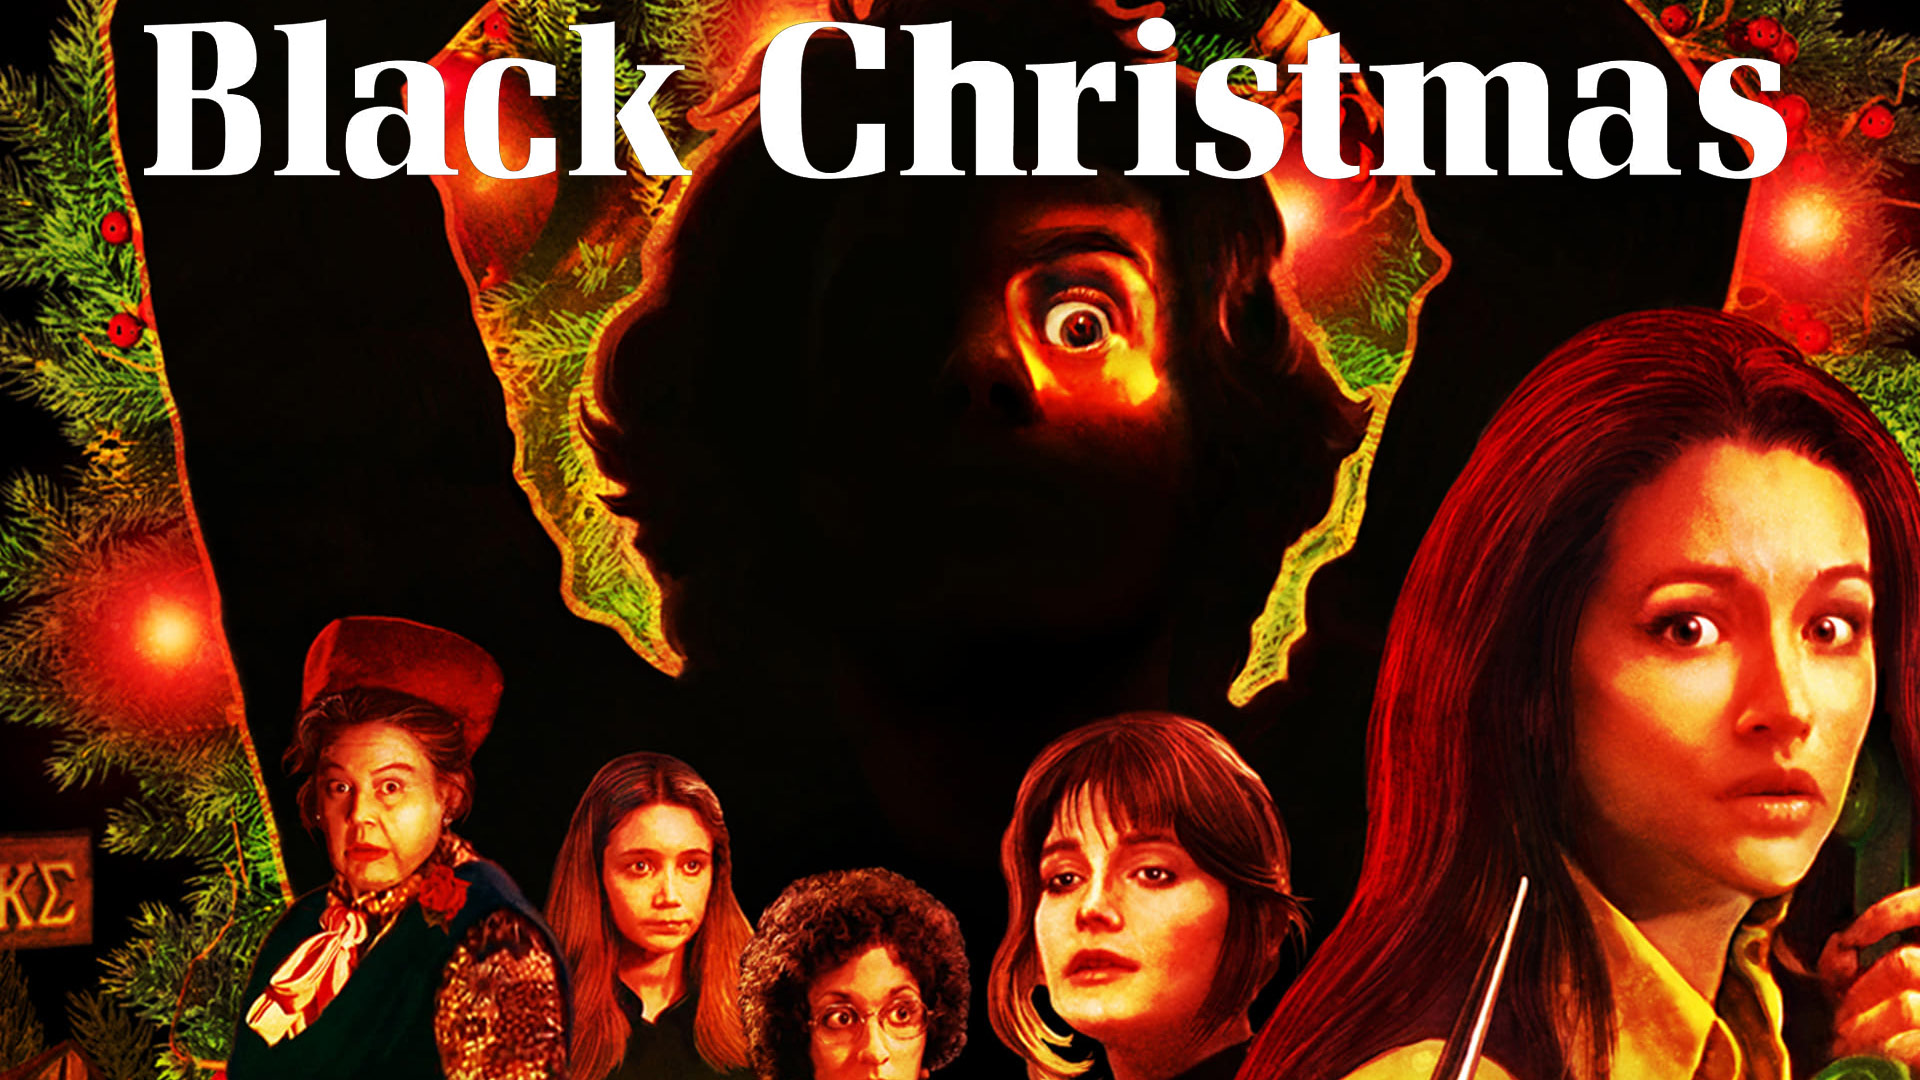 Black Christmas (1974) Review – A Slow Burning Gem That Aged Well